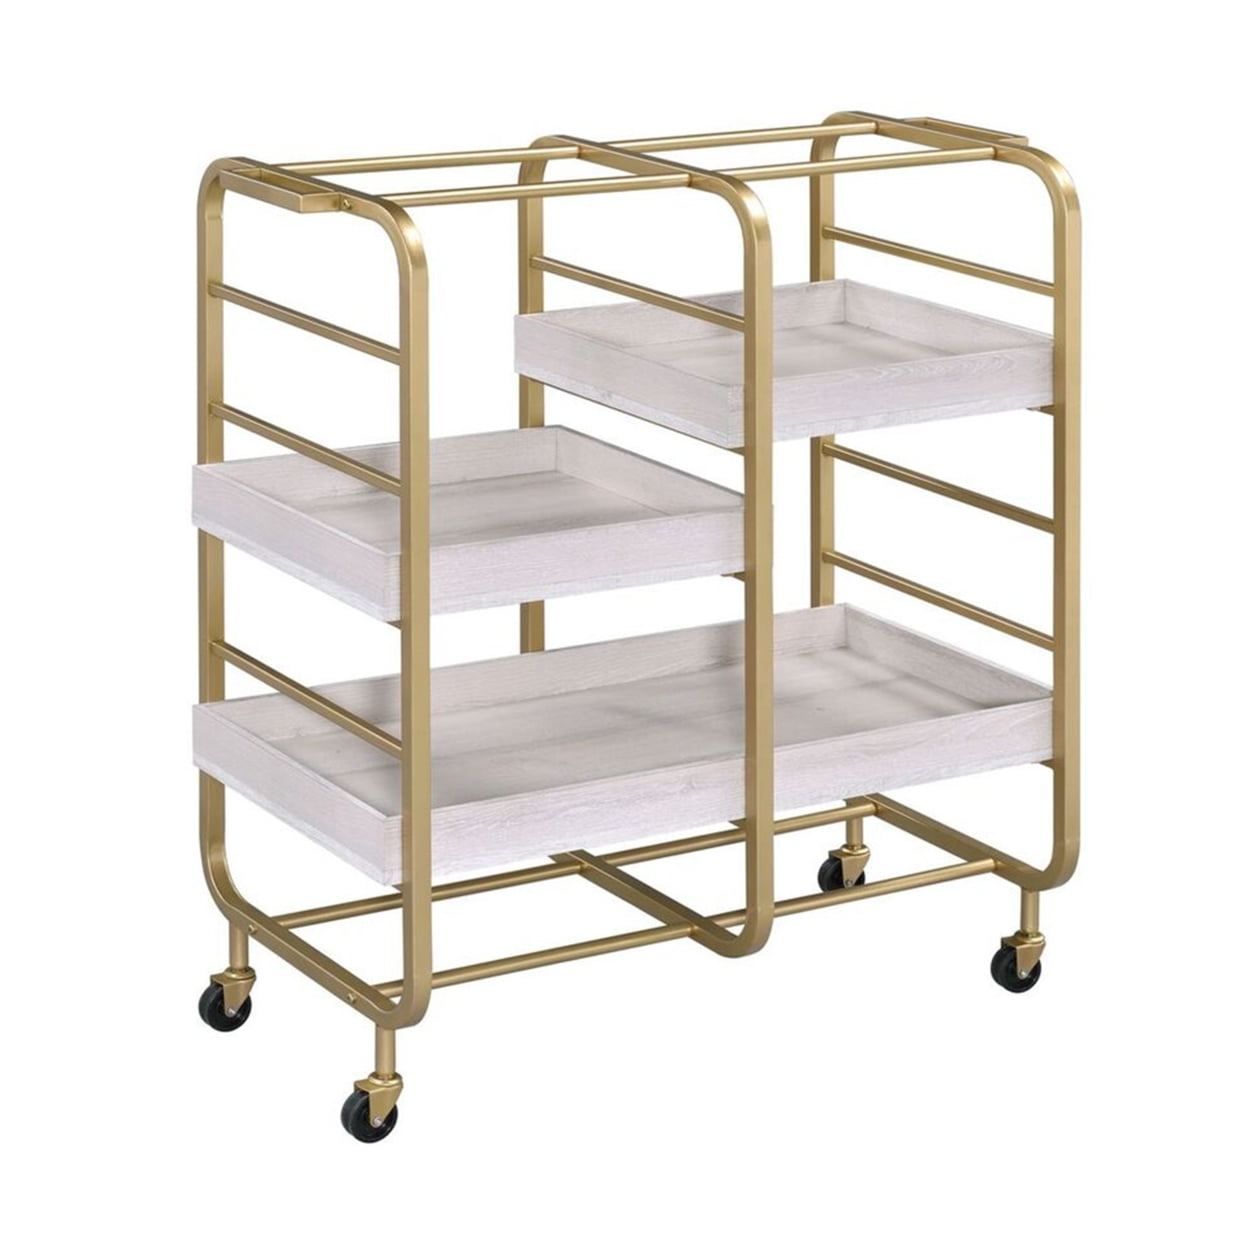 Picture of Benjara BM211119 Metal Frame Serving Cart with Adjustable Compartments - Gold & Washed White - 38 x 17 x 34 in.